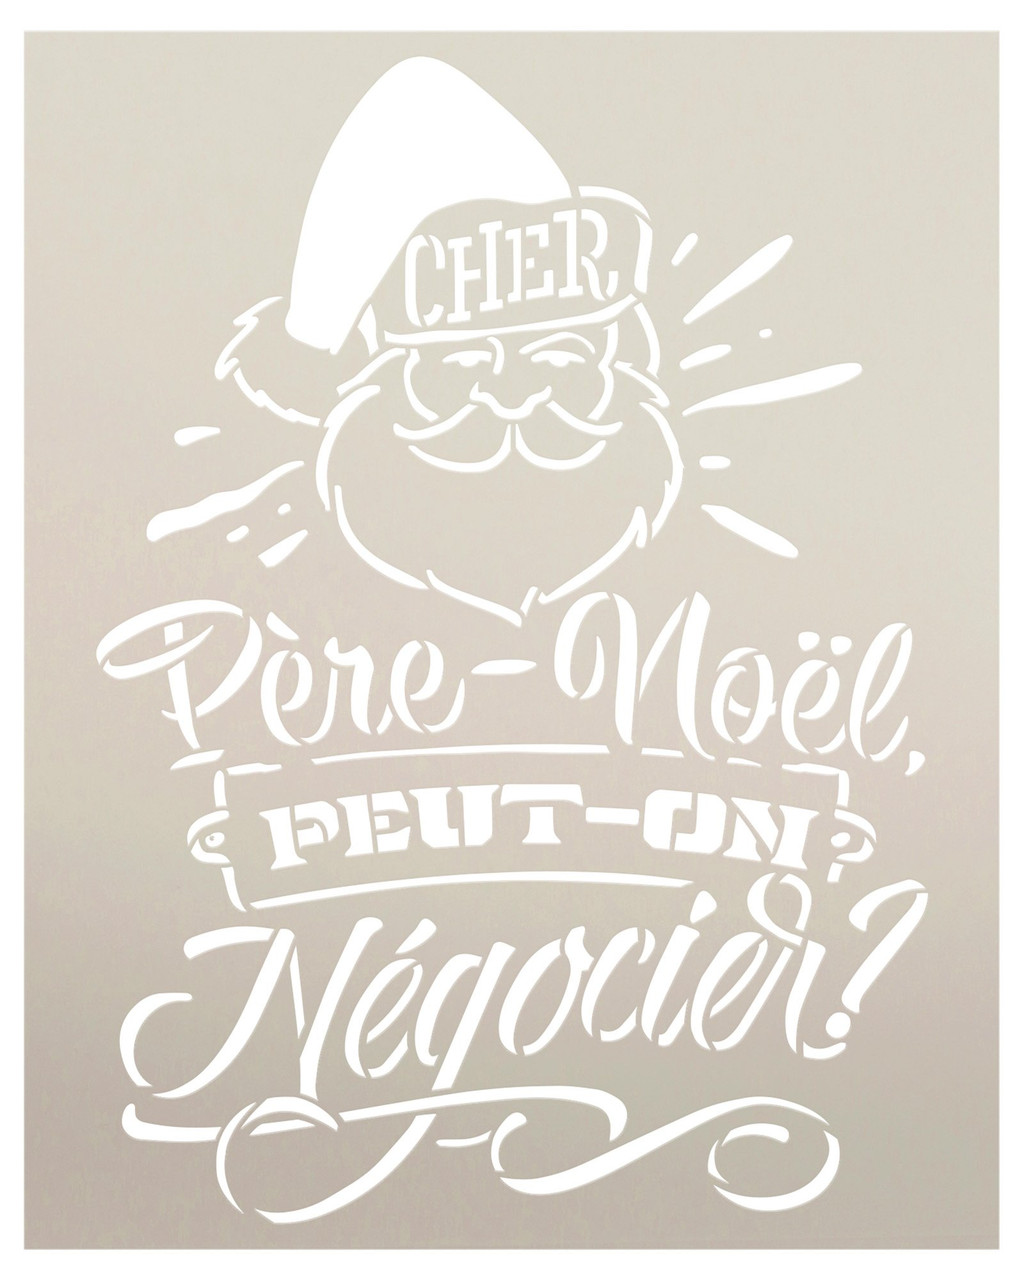 Pere Noel Peut on Negocier French Stencil w/ Santa Claus by StudioR12 - Select Size - USA Made - Craft DIY Christmas Home Decor | Paint Wood Sign